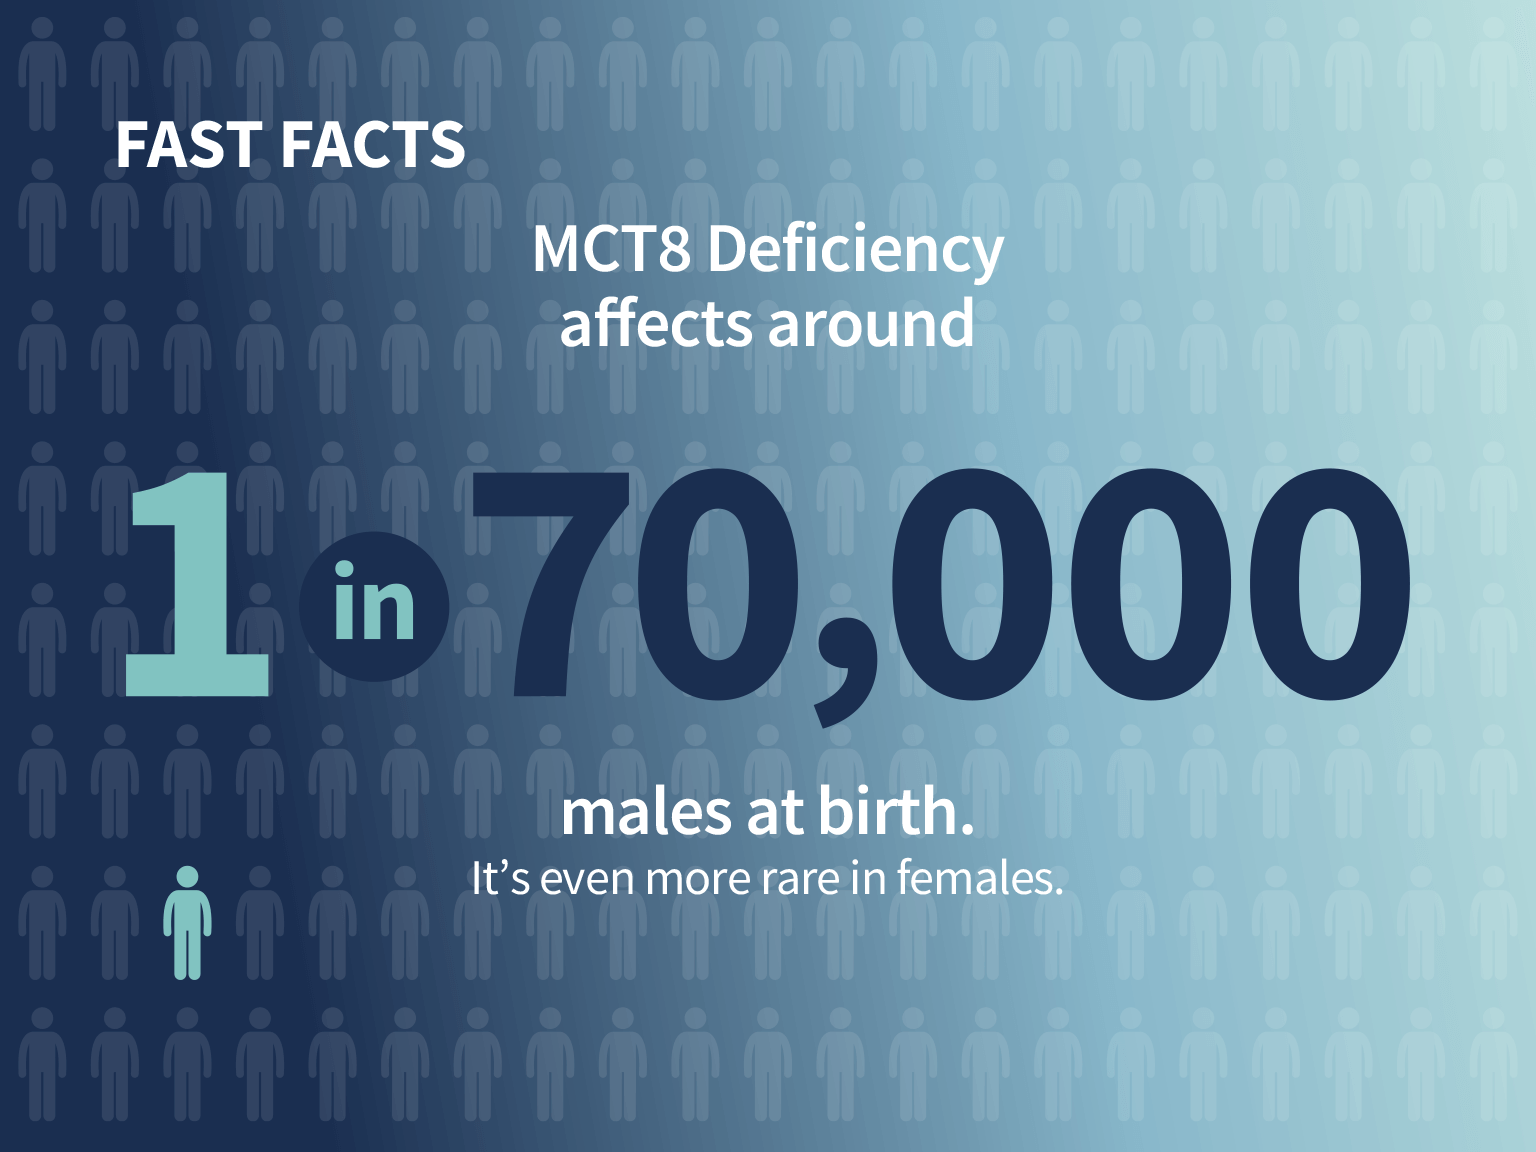 MCT8 Deficiency affects around 1 in 70000 males at birth. Itʼs even more rare in females.